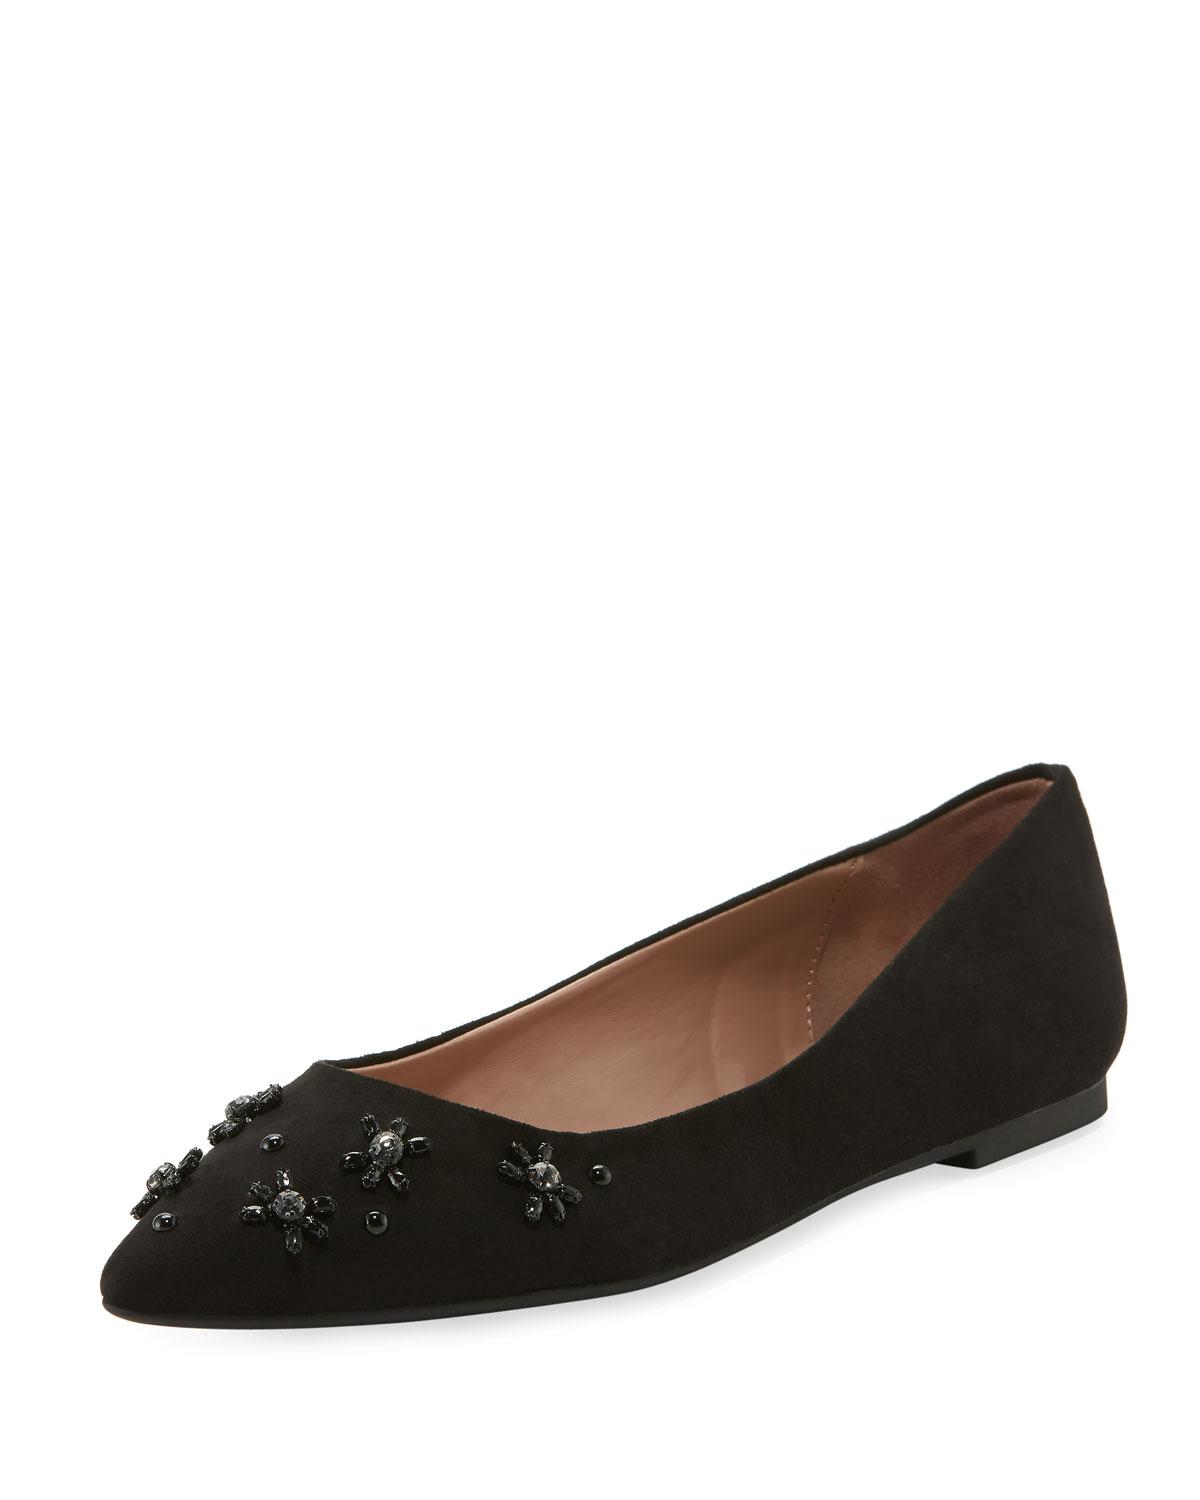 Circus by Sam Edelman Ritchie Embellished Ballet Flats in Black - Lyst